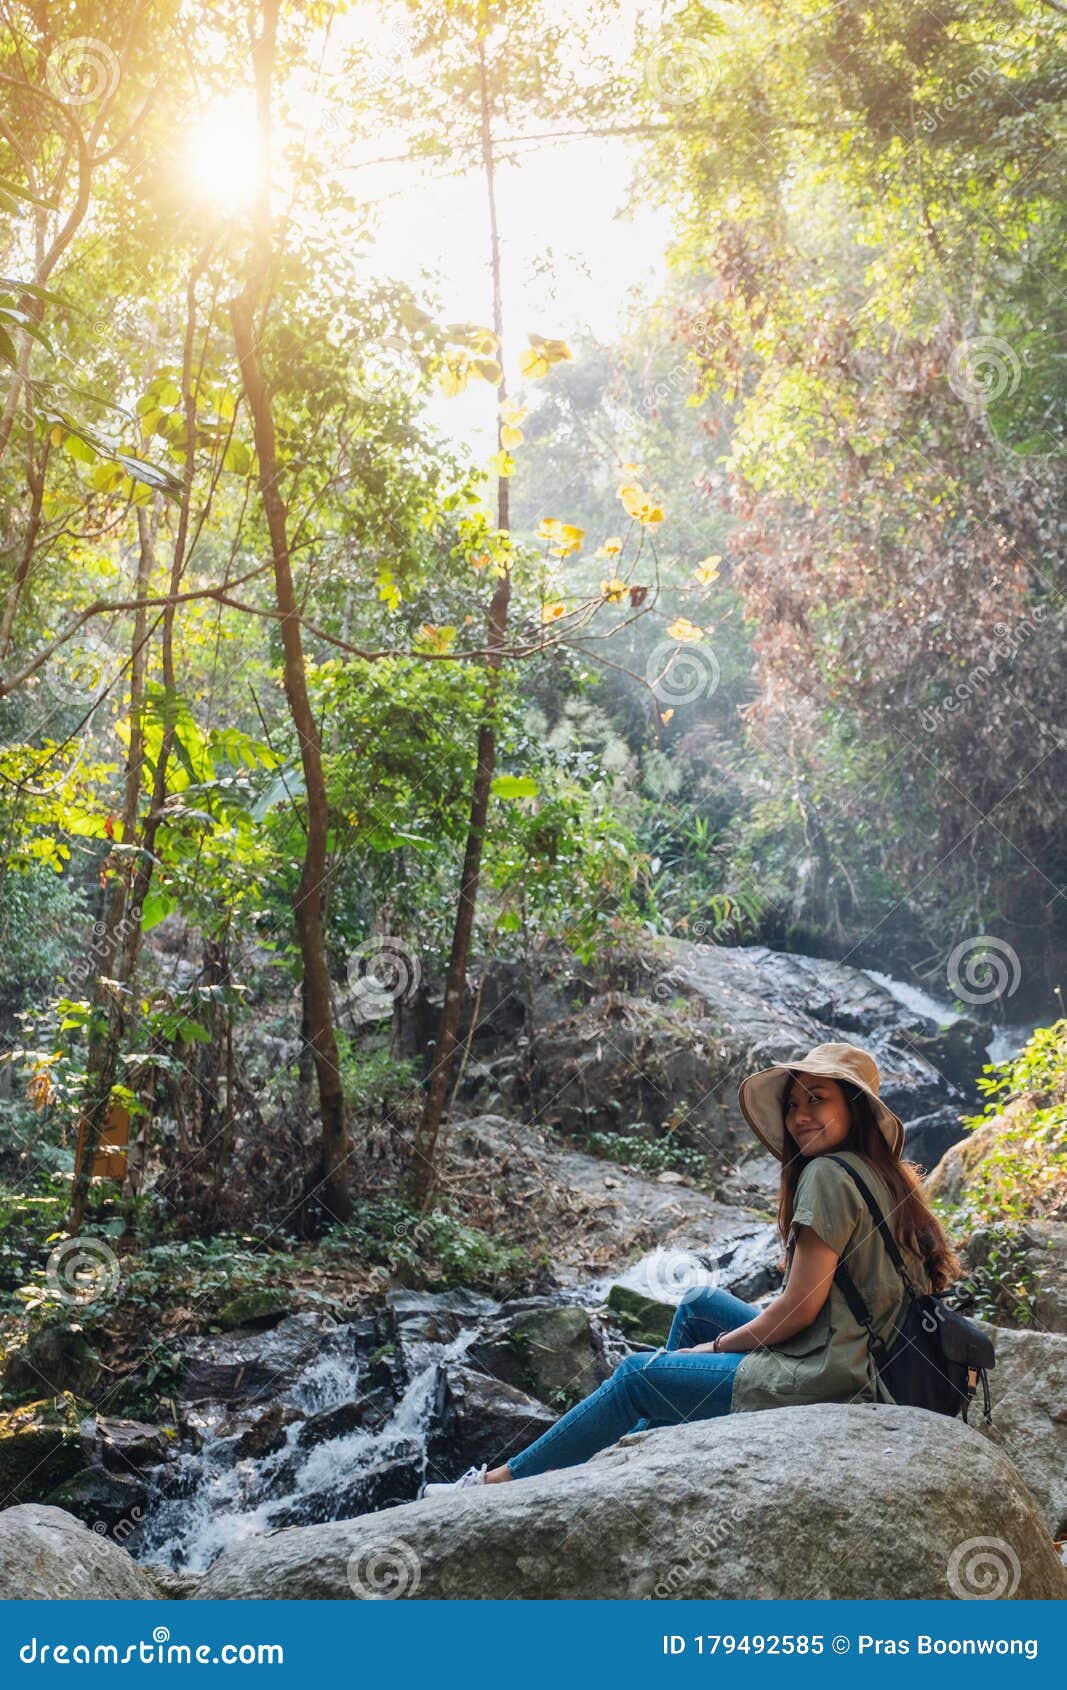 A Woman Sitting on the Rock in Front of Waterfall Stock Image - Image ...